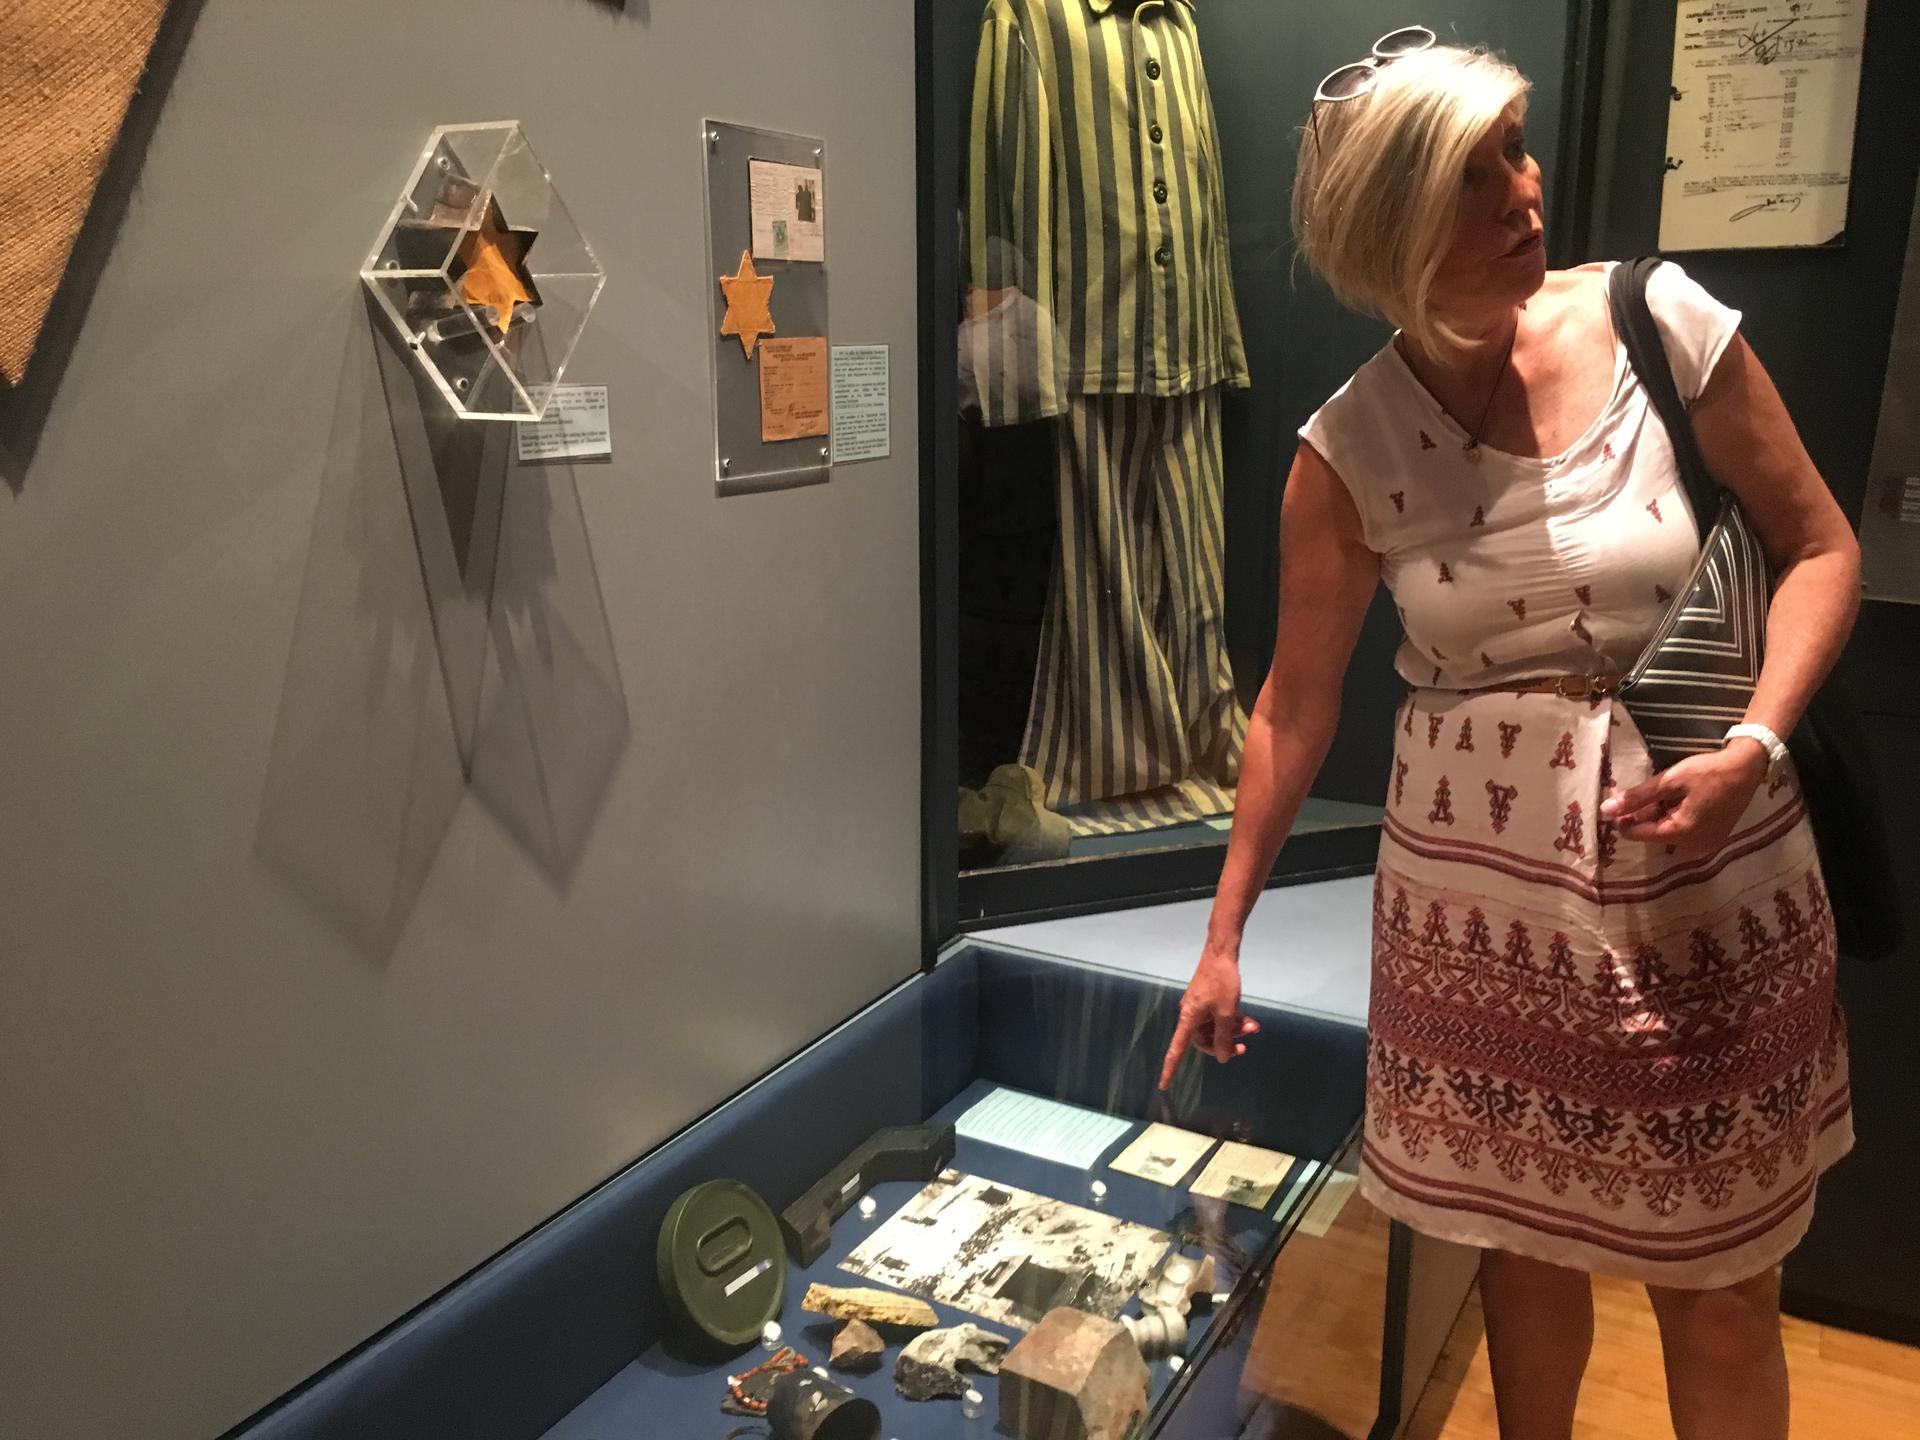 Inside the Jewish Museum of Thessaloniki, Hella Kounio Matalon points to items collected by her father from Auschwitz, after he was liberated. He was among very few of Thessaloniki's Jews to survive the Holocaust.